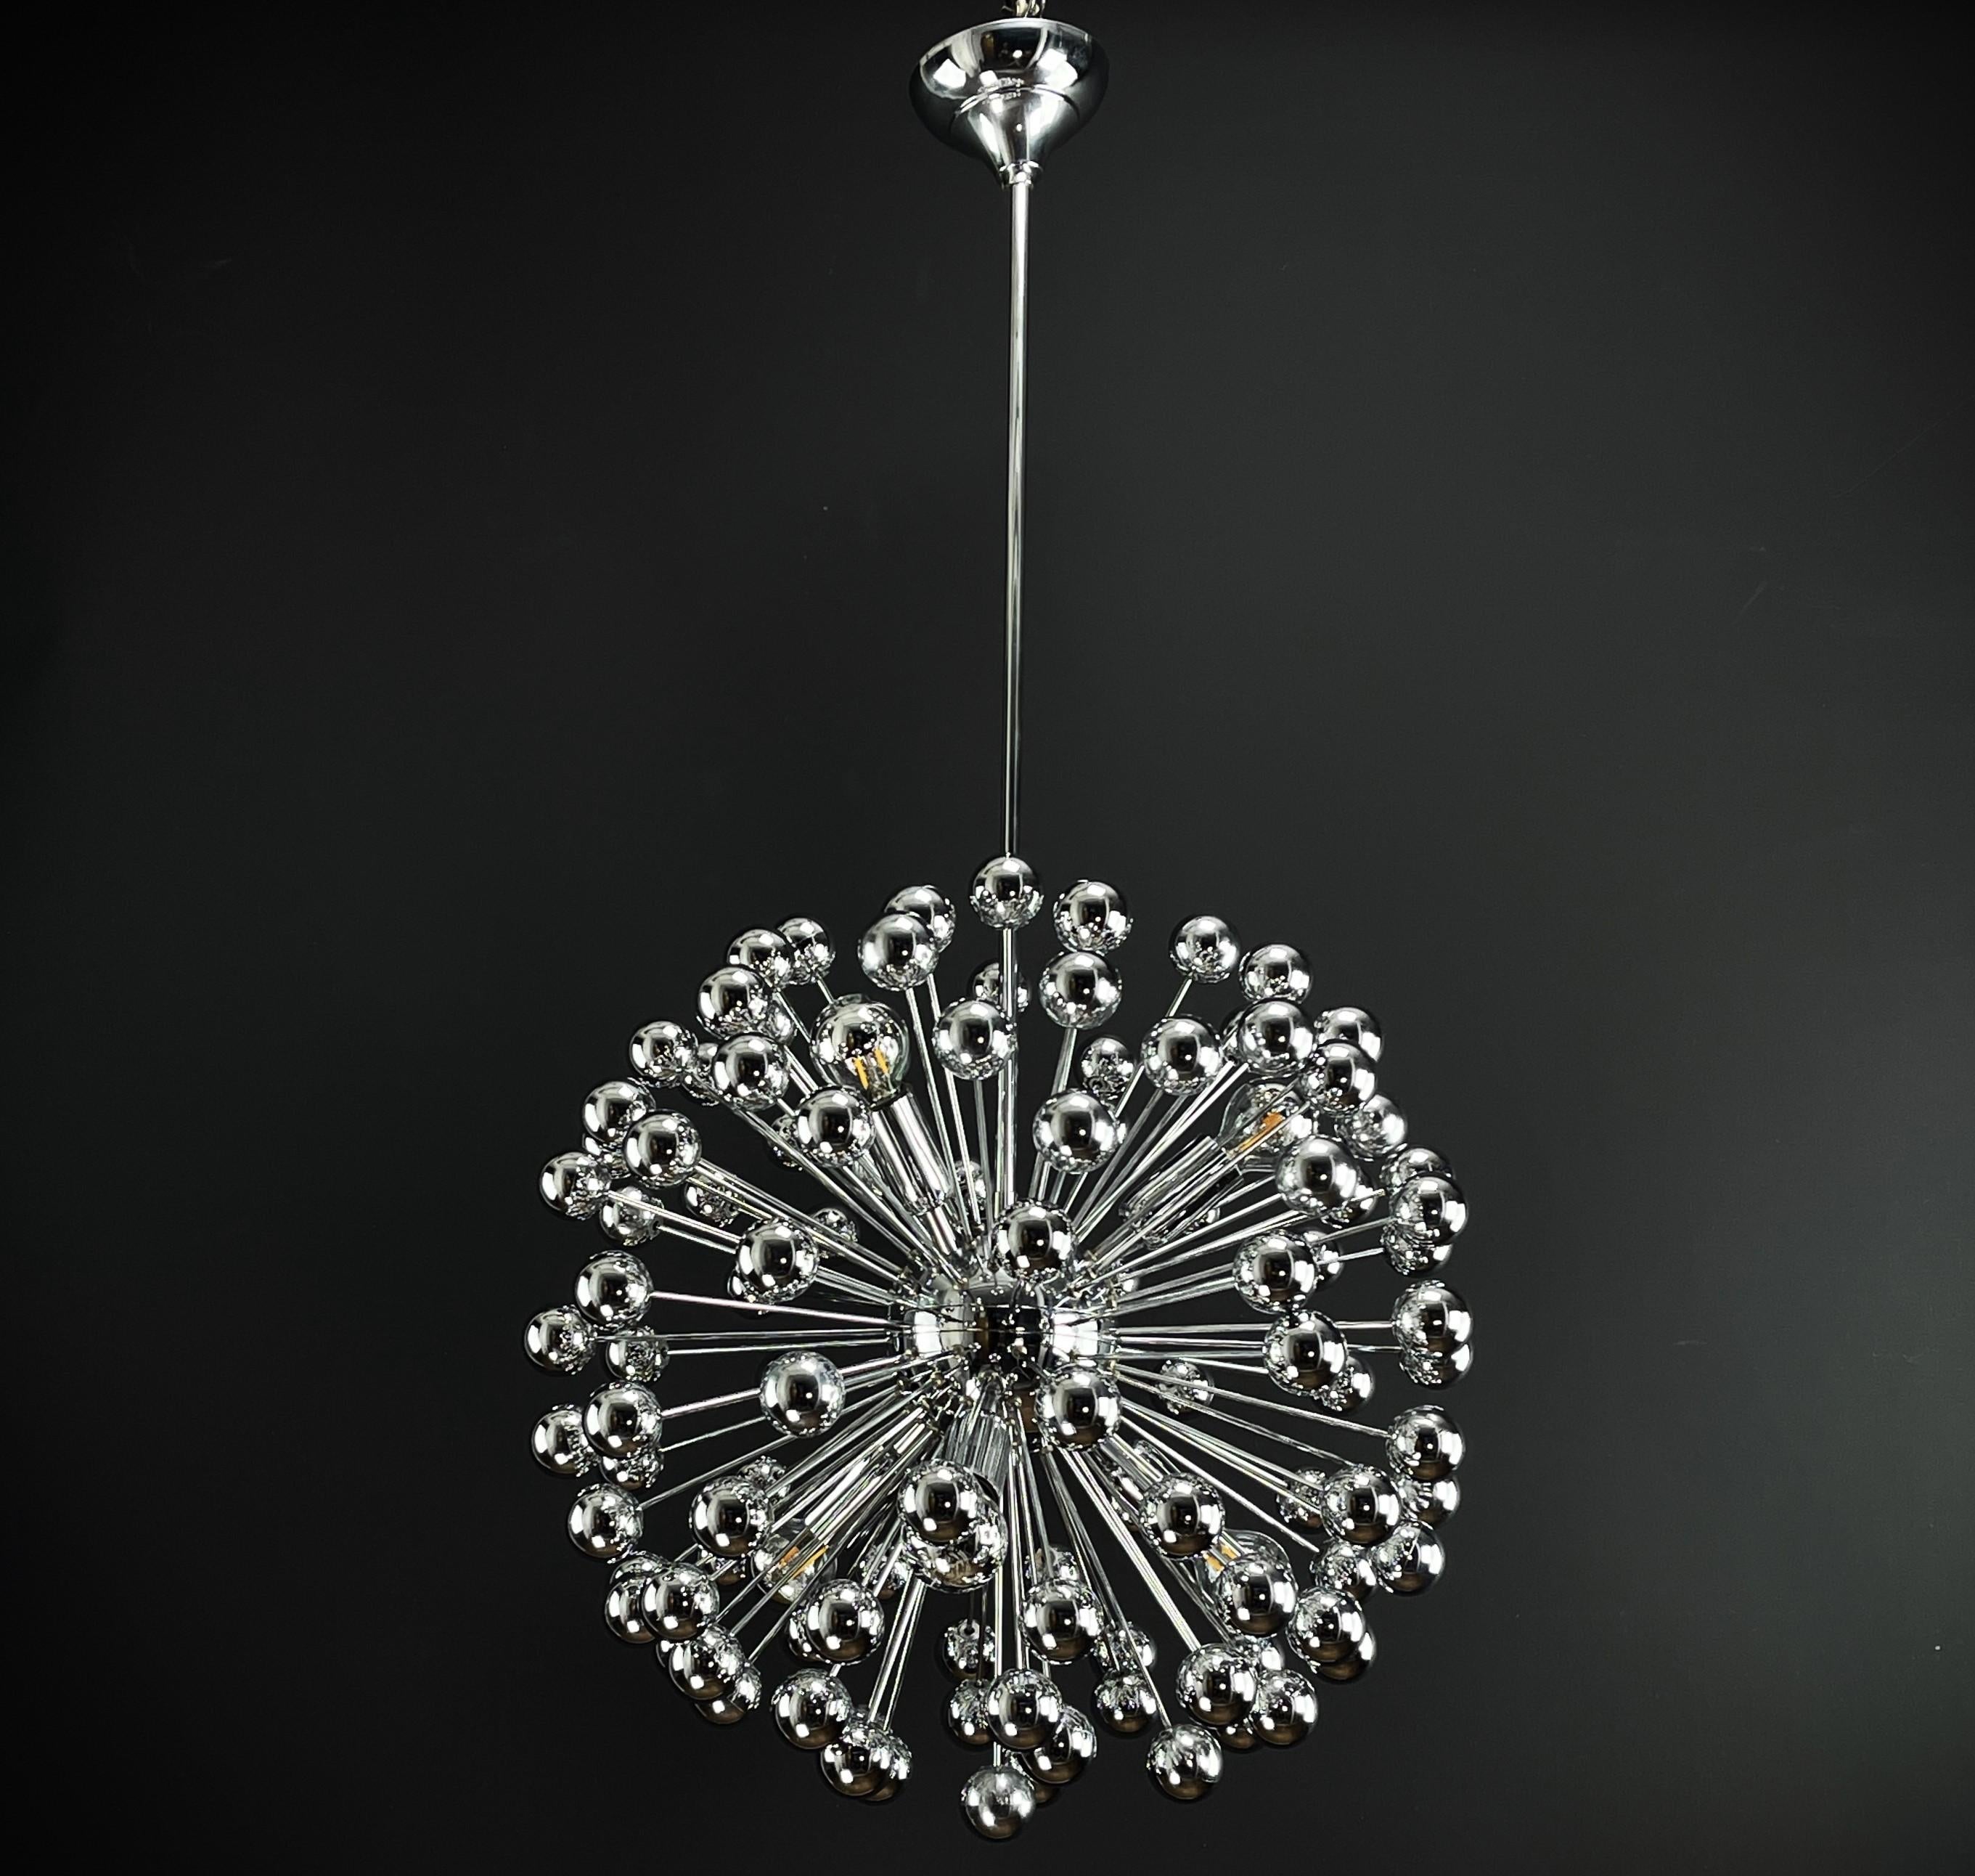 Space Age chrom Sputnik Ceiling Lamp by Valenti Luce, 1970s For Sale